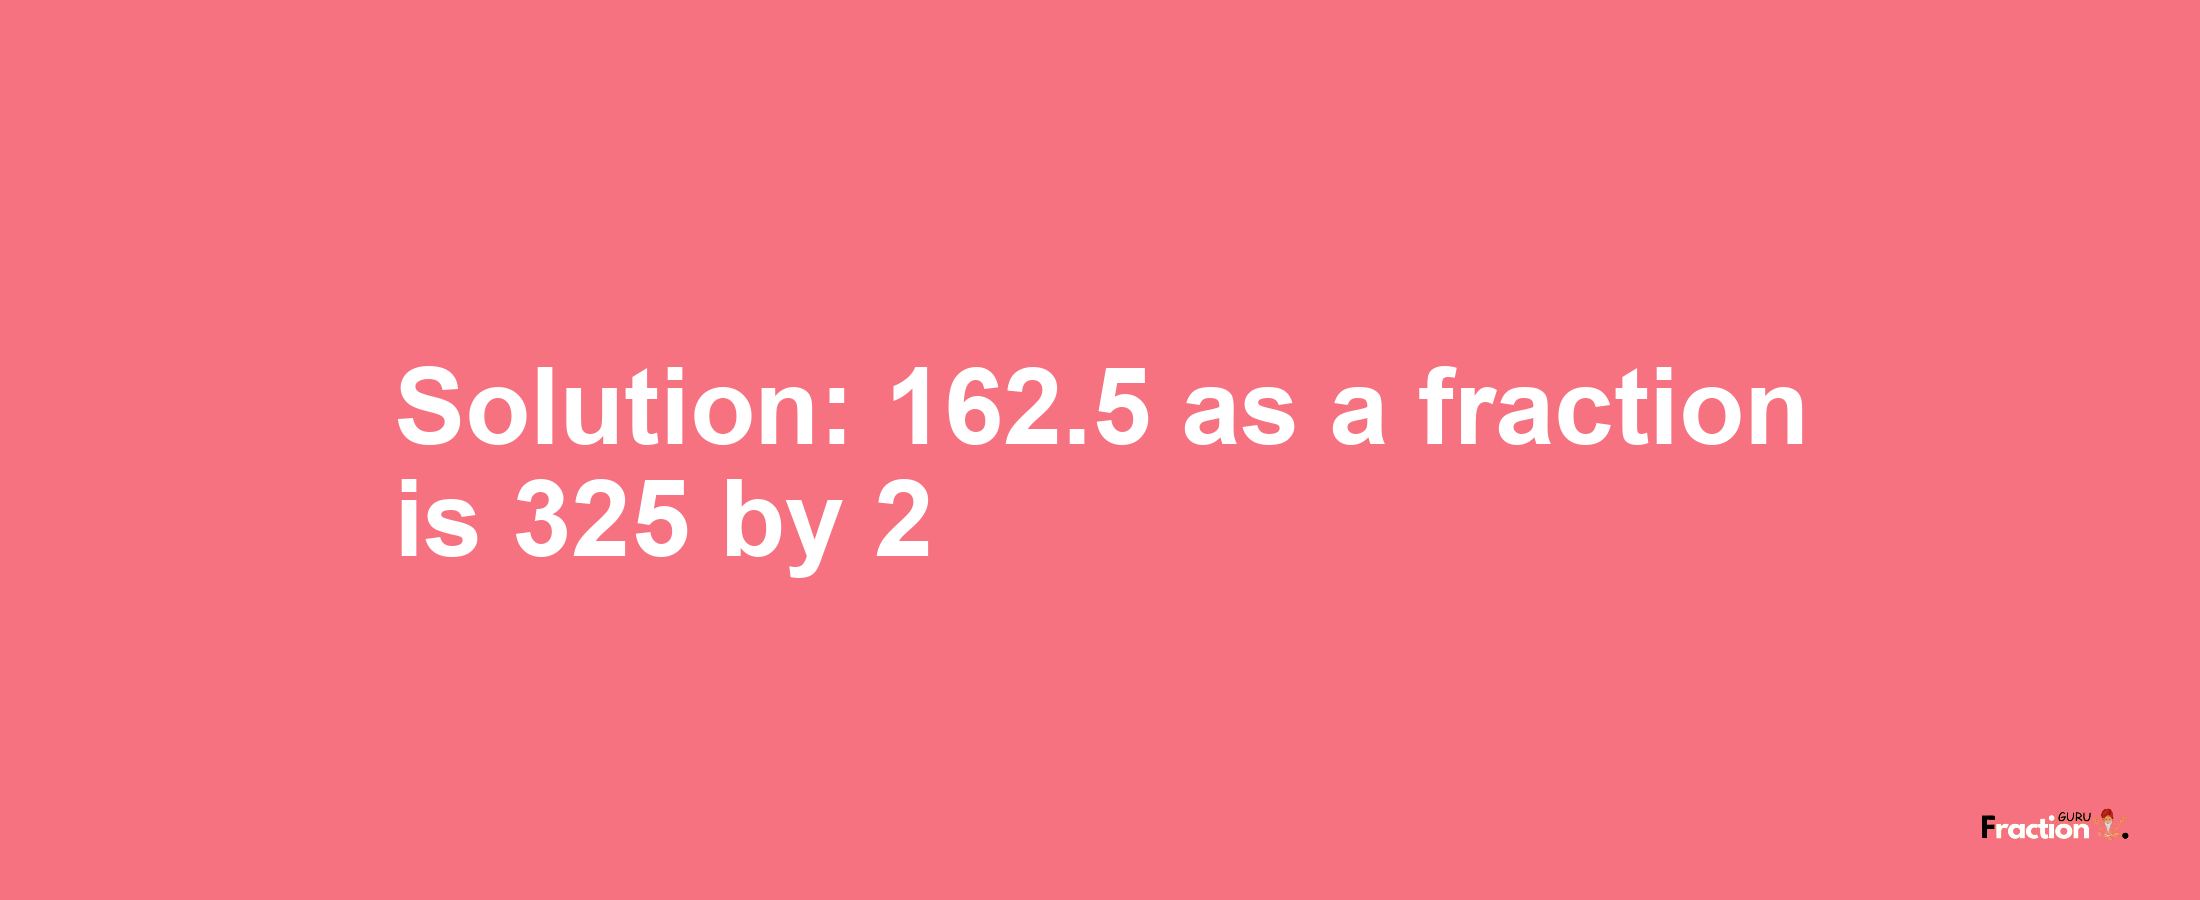 Solution:162.5 as a fraction is 325/2